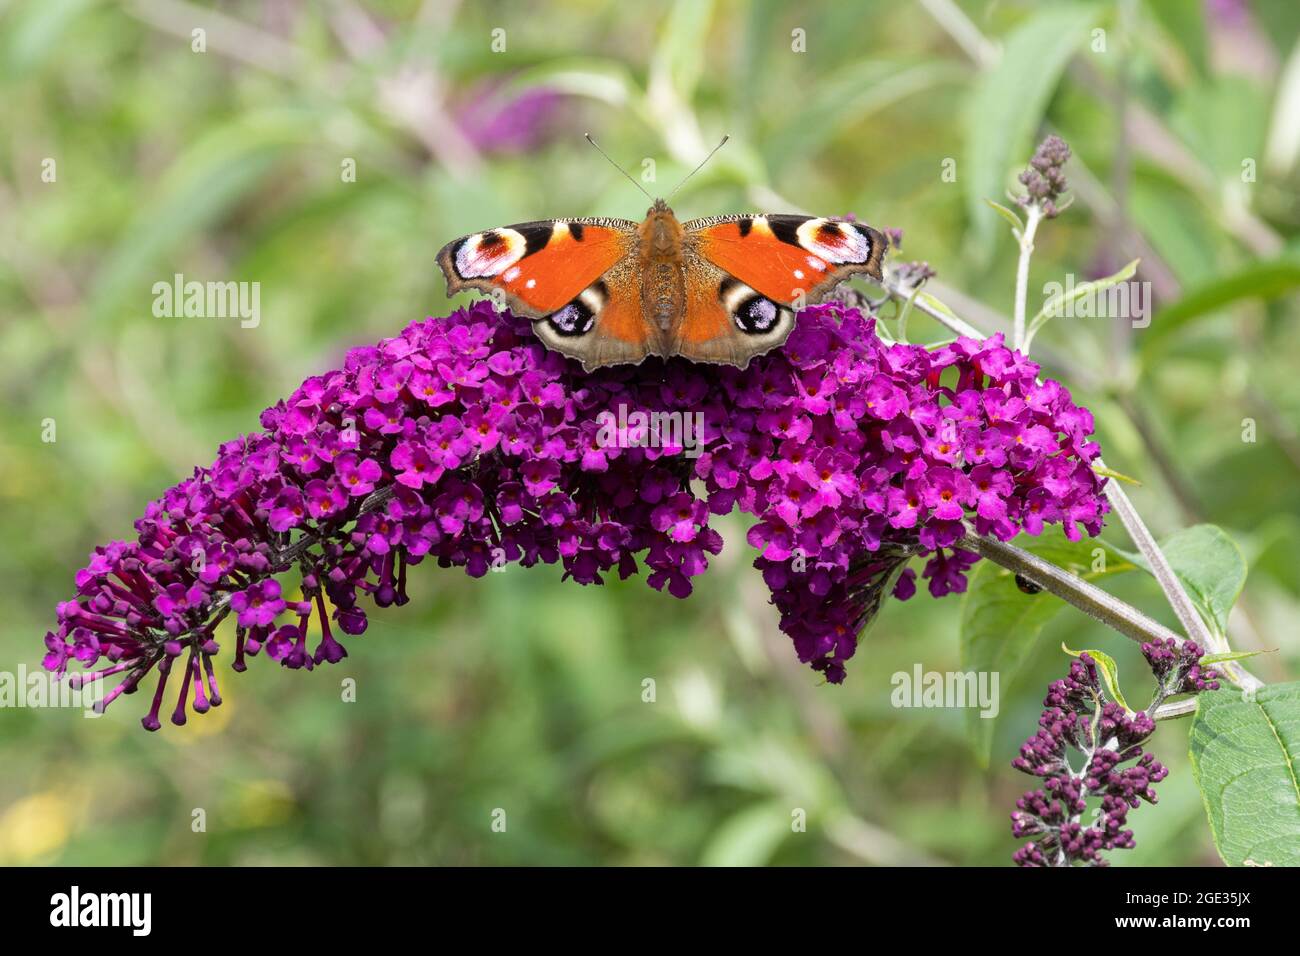 Peacock butterfly (Aglais io) on Buddleja davidii Royal Red flowers, also called a butterfly bush, during summer, UK Stock Photo